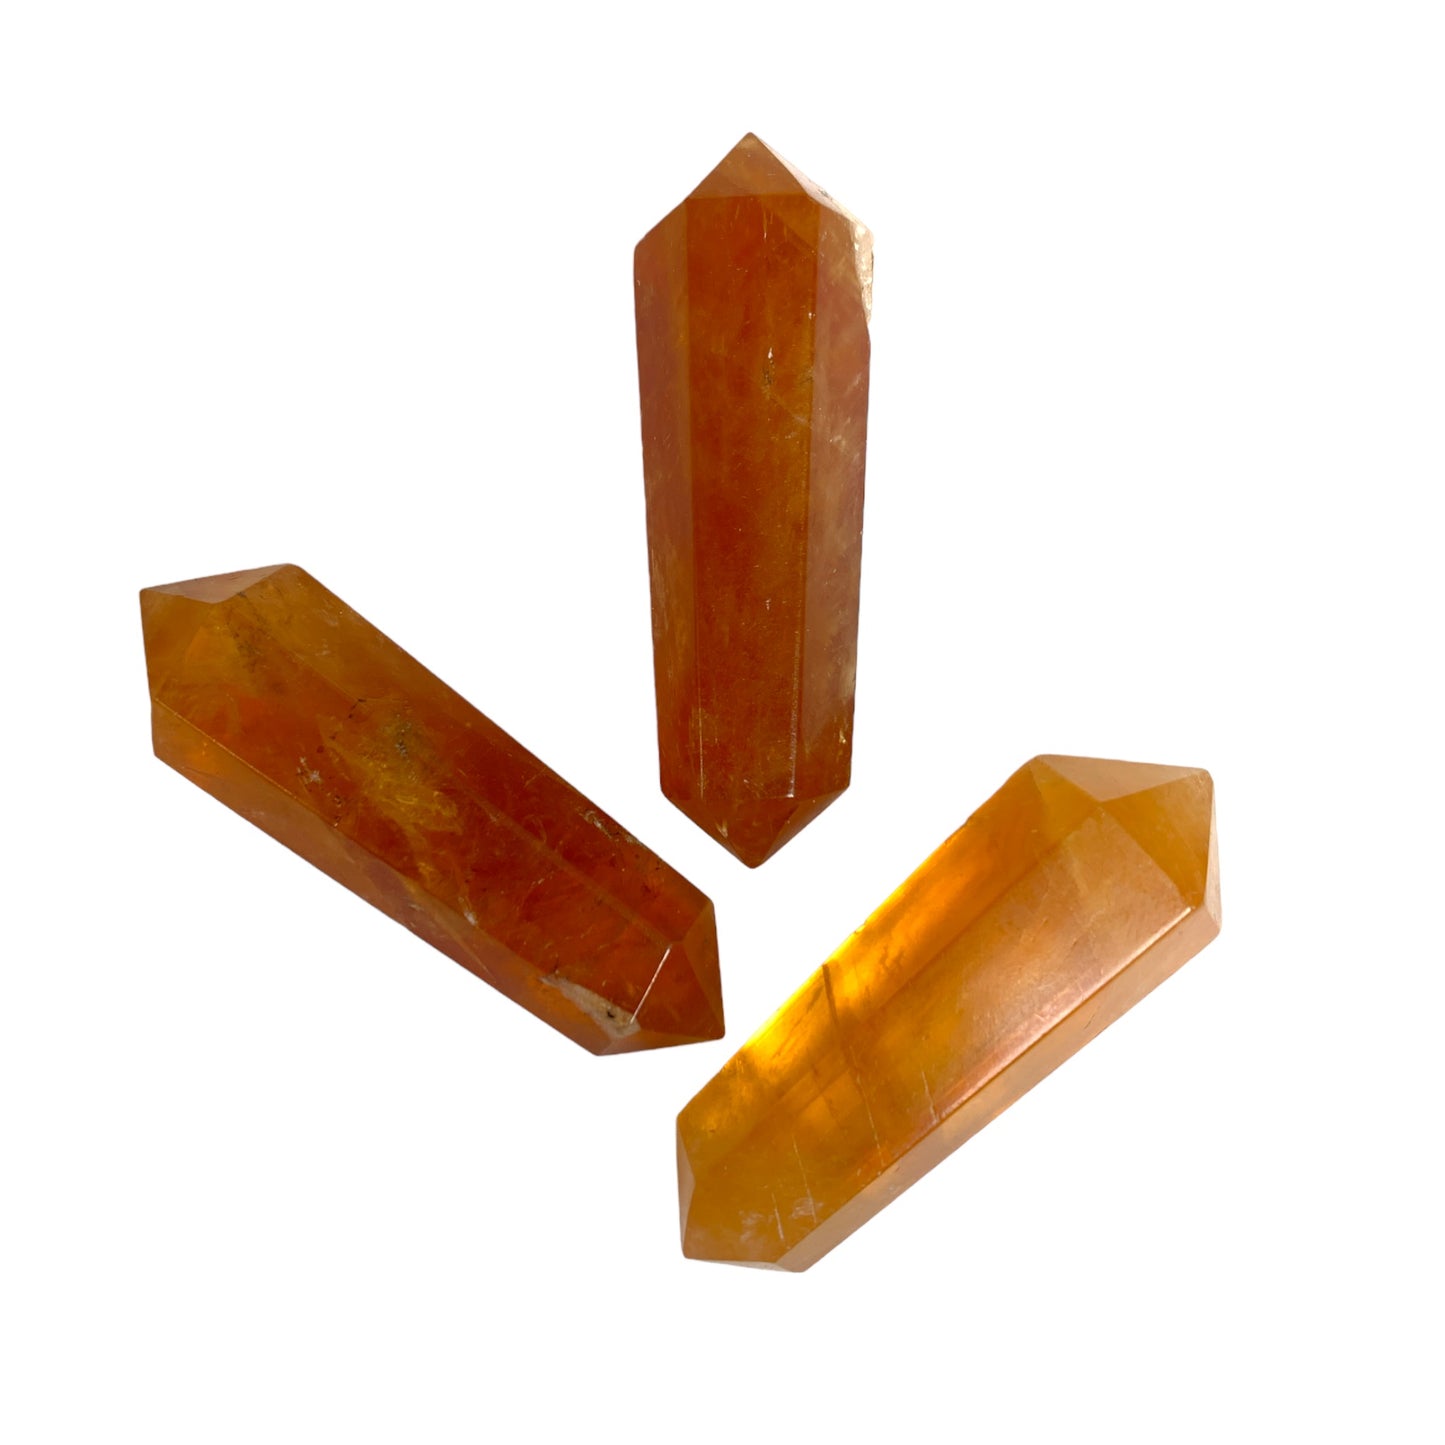 Citrine - 35-45mm - Double Terminated Pencil Points - 6 Grams - India - order in 5's - NEW1221